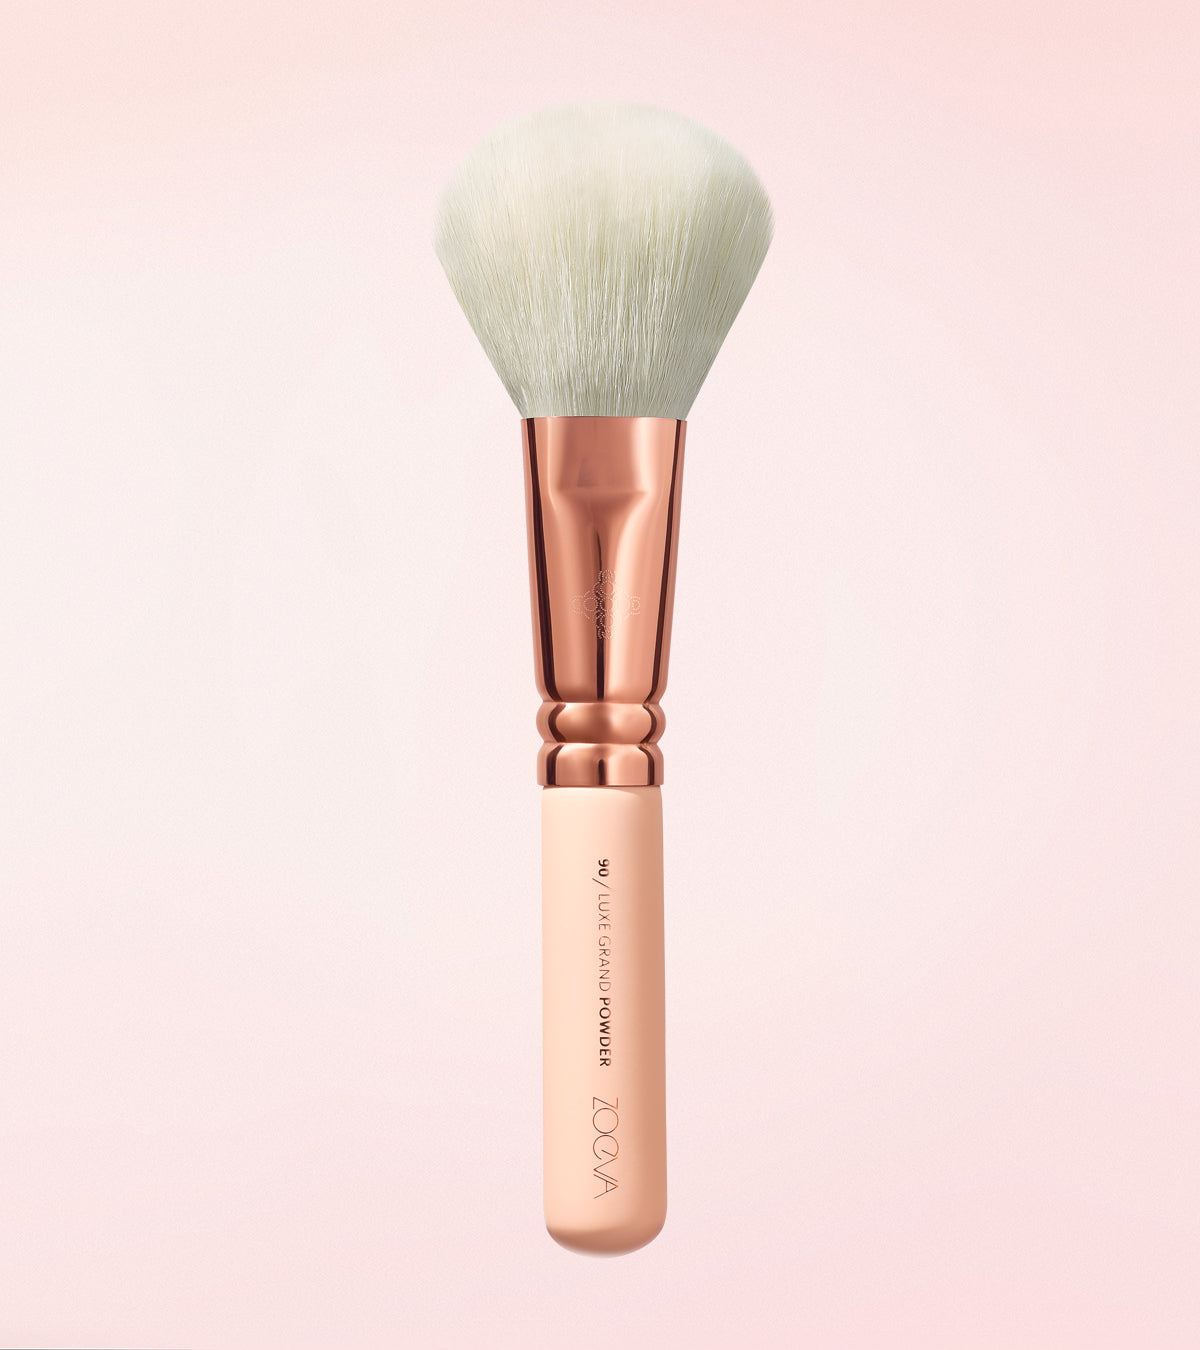 090 LUXE GRAND POWDER BRUSH (ROSE GOLDEN VOL. 2) Main Image featured